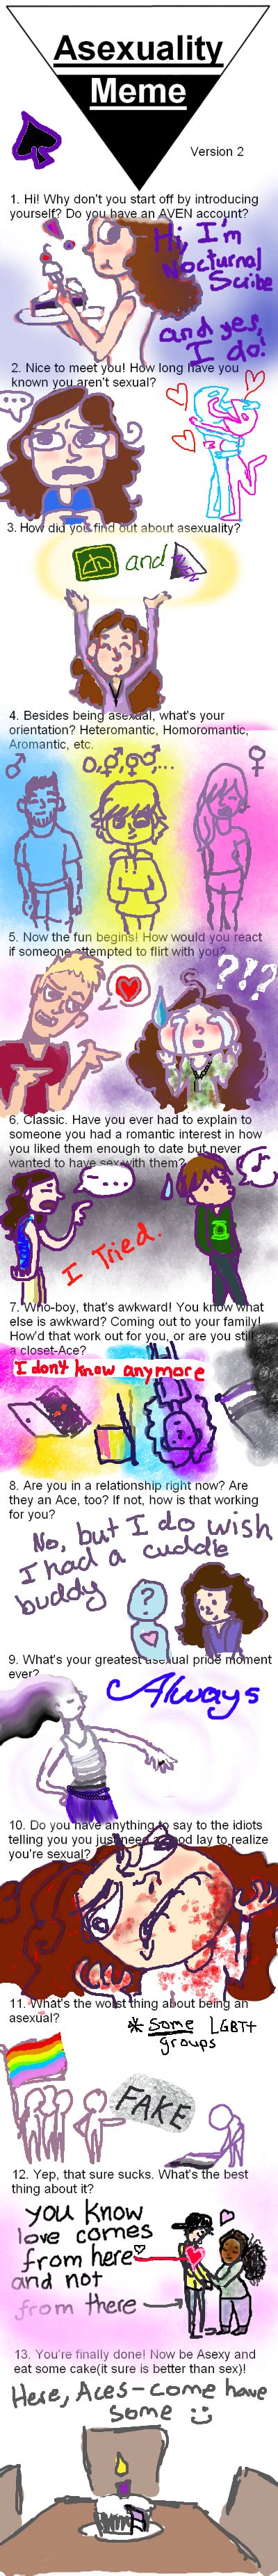 asexual meme by nocturnalscribe on deviantart